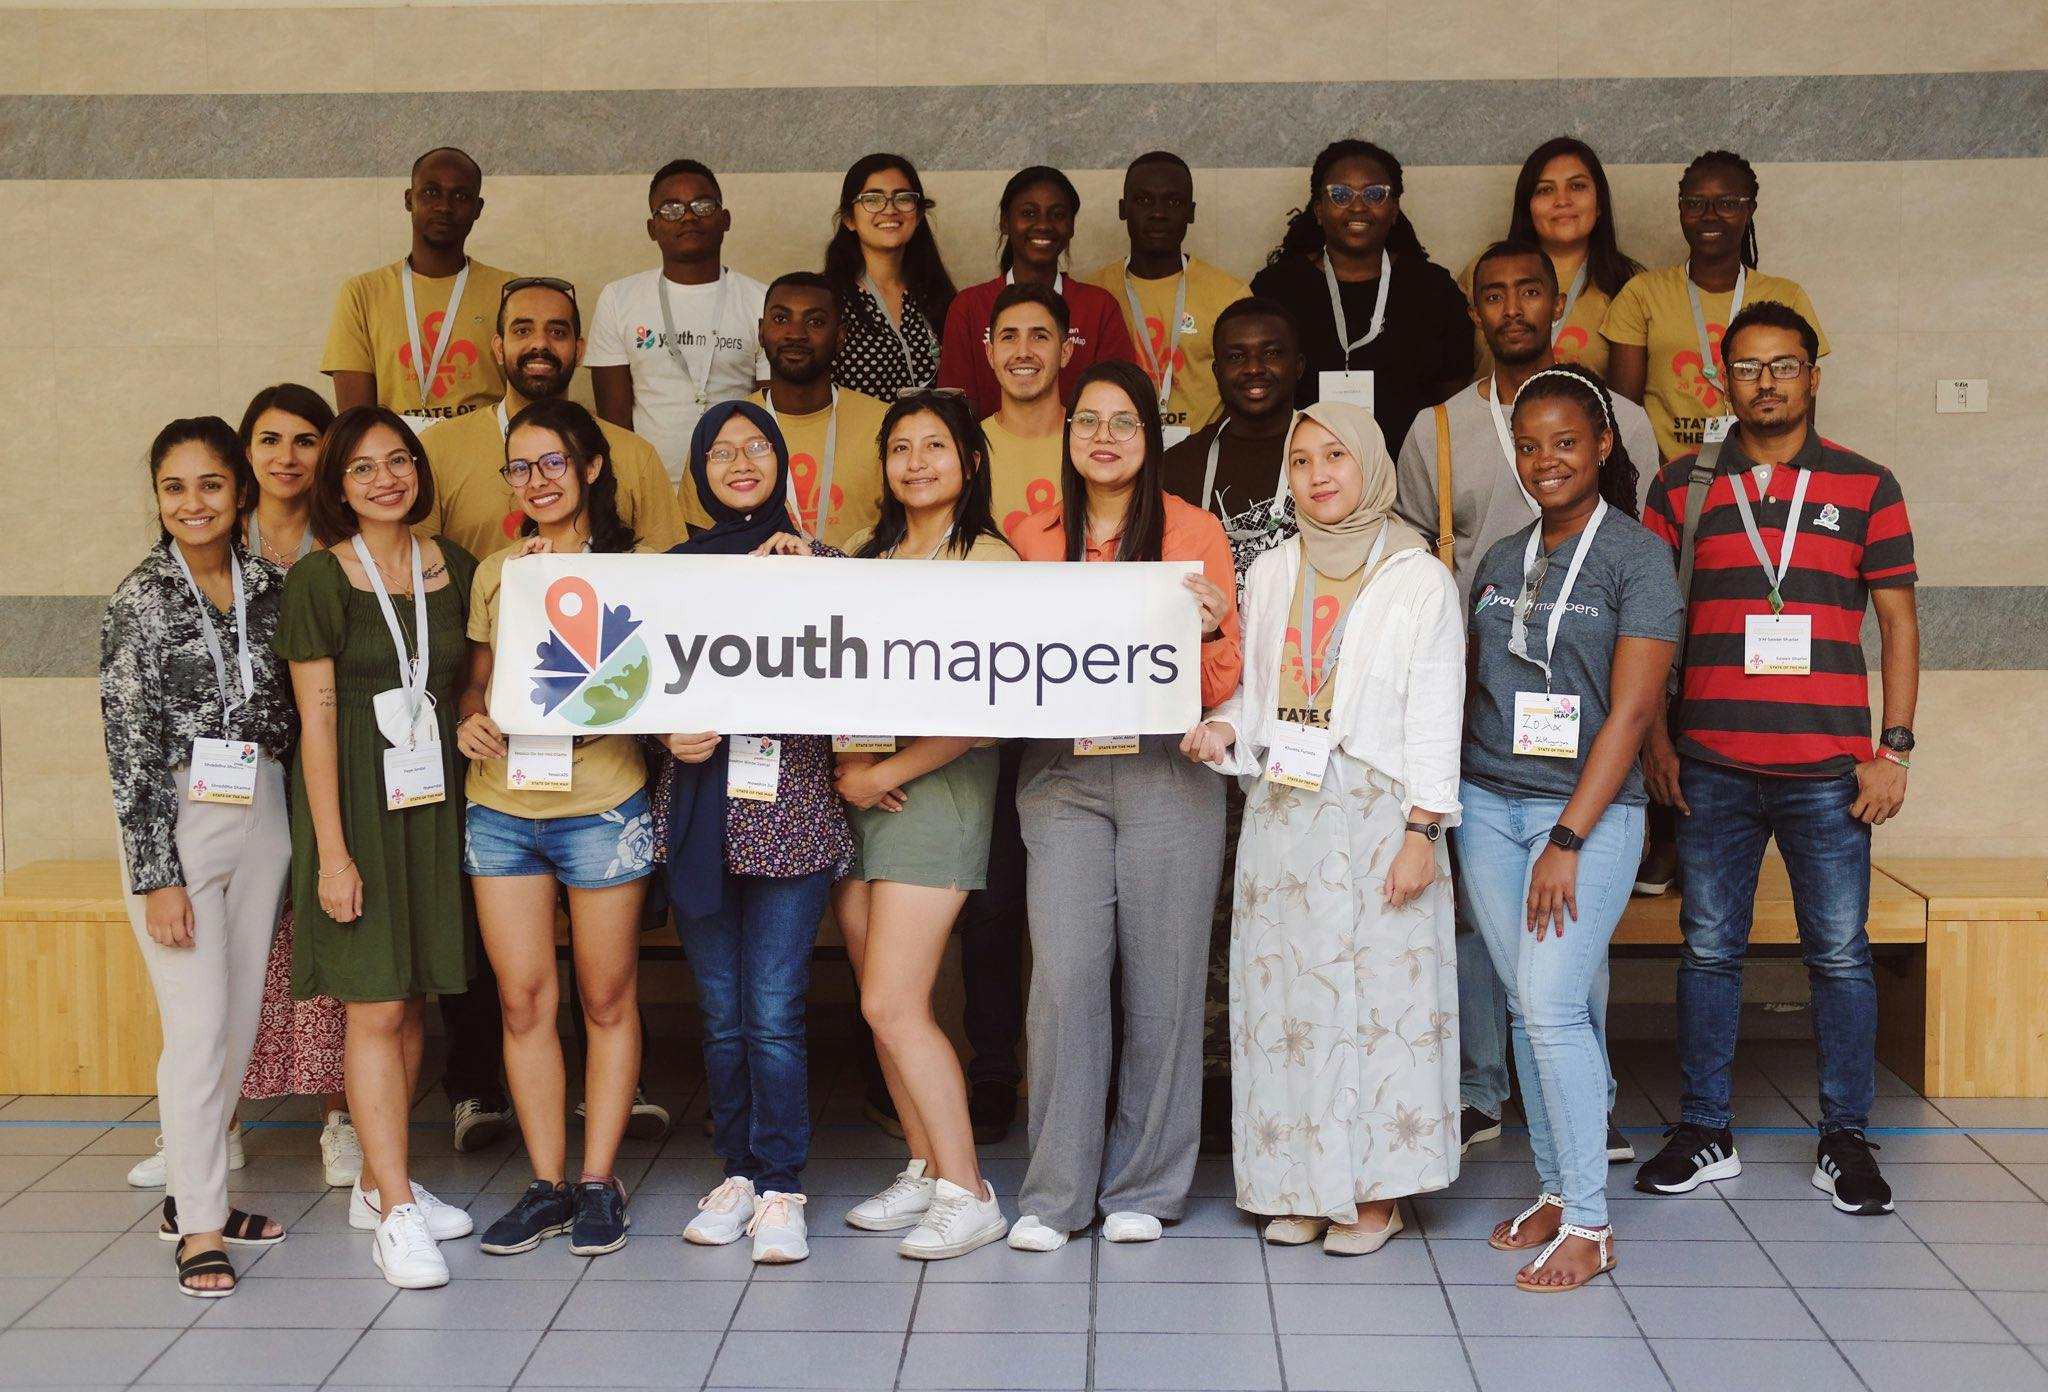 youthmappers-group